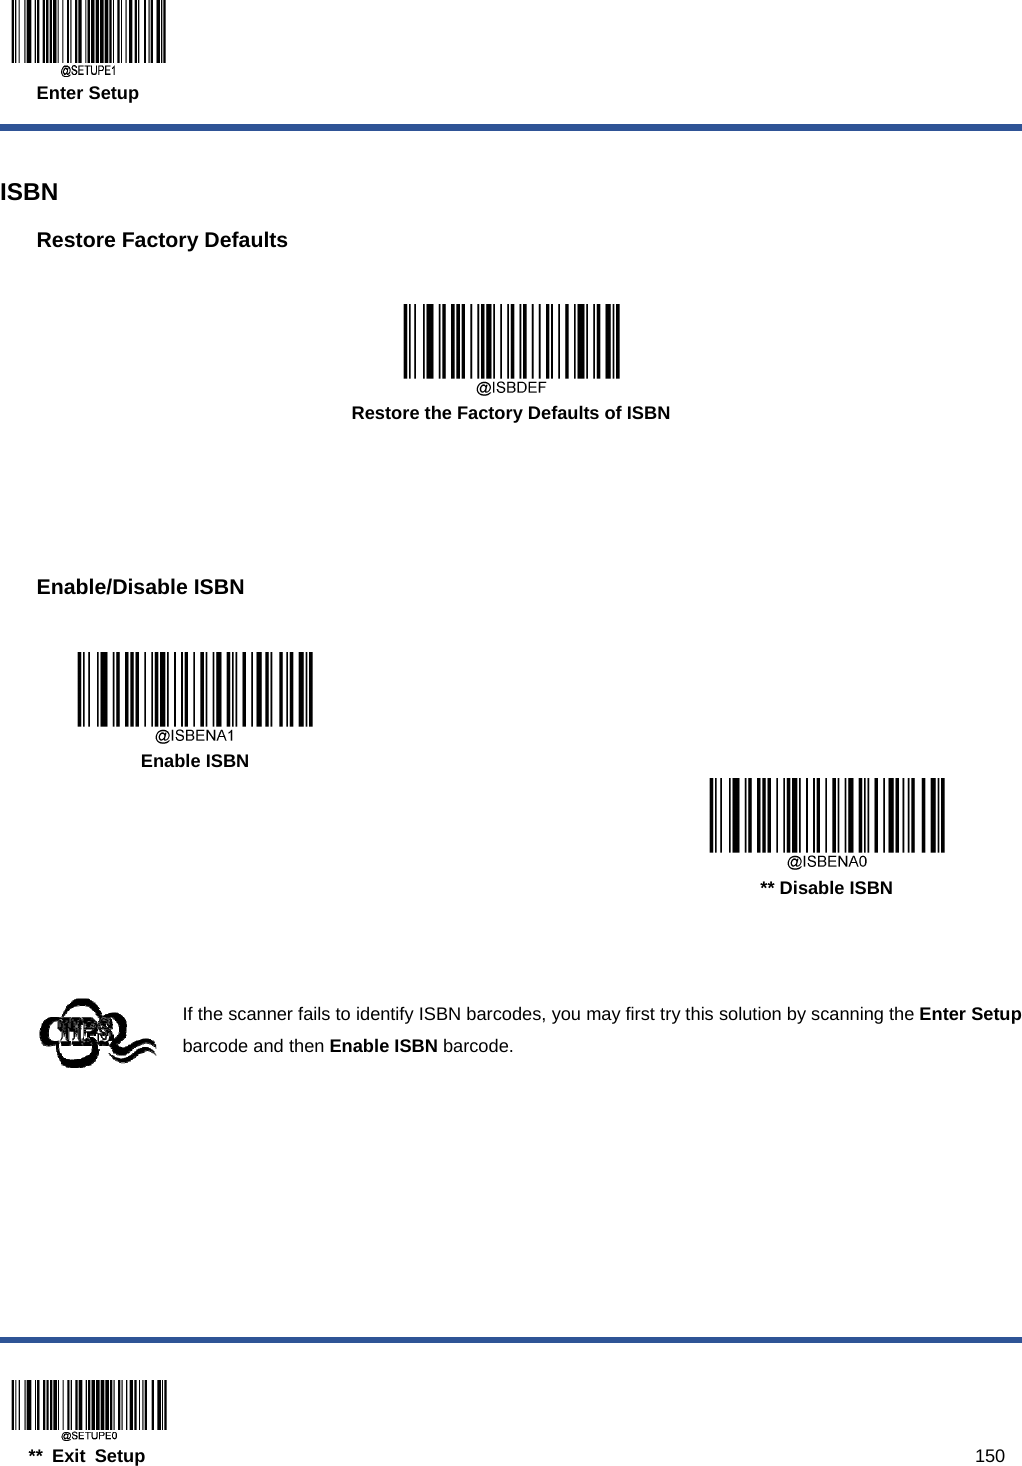  Enter Setup  ** Exit Setup                                                                                           150  ISBN Restore Factory Defaults   Restore the Factory Defaults of ISBN     Enable/Disable ISBN     Enable ISBN      ** Disable ISBN    If the scanner fails to identify ISBN barcodes, you may first try this solution by scanning the Enter Setup barcode and then Enable ISBN barcode.  